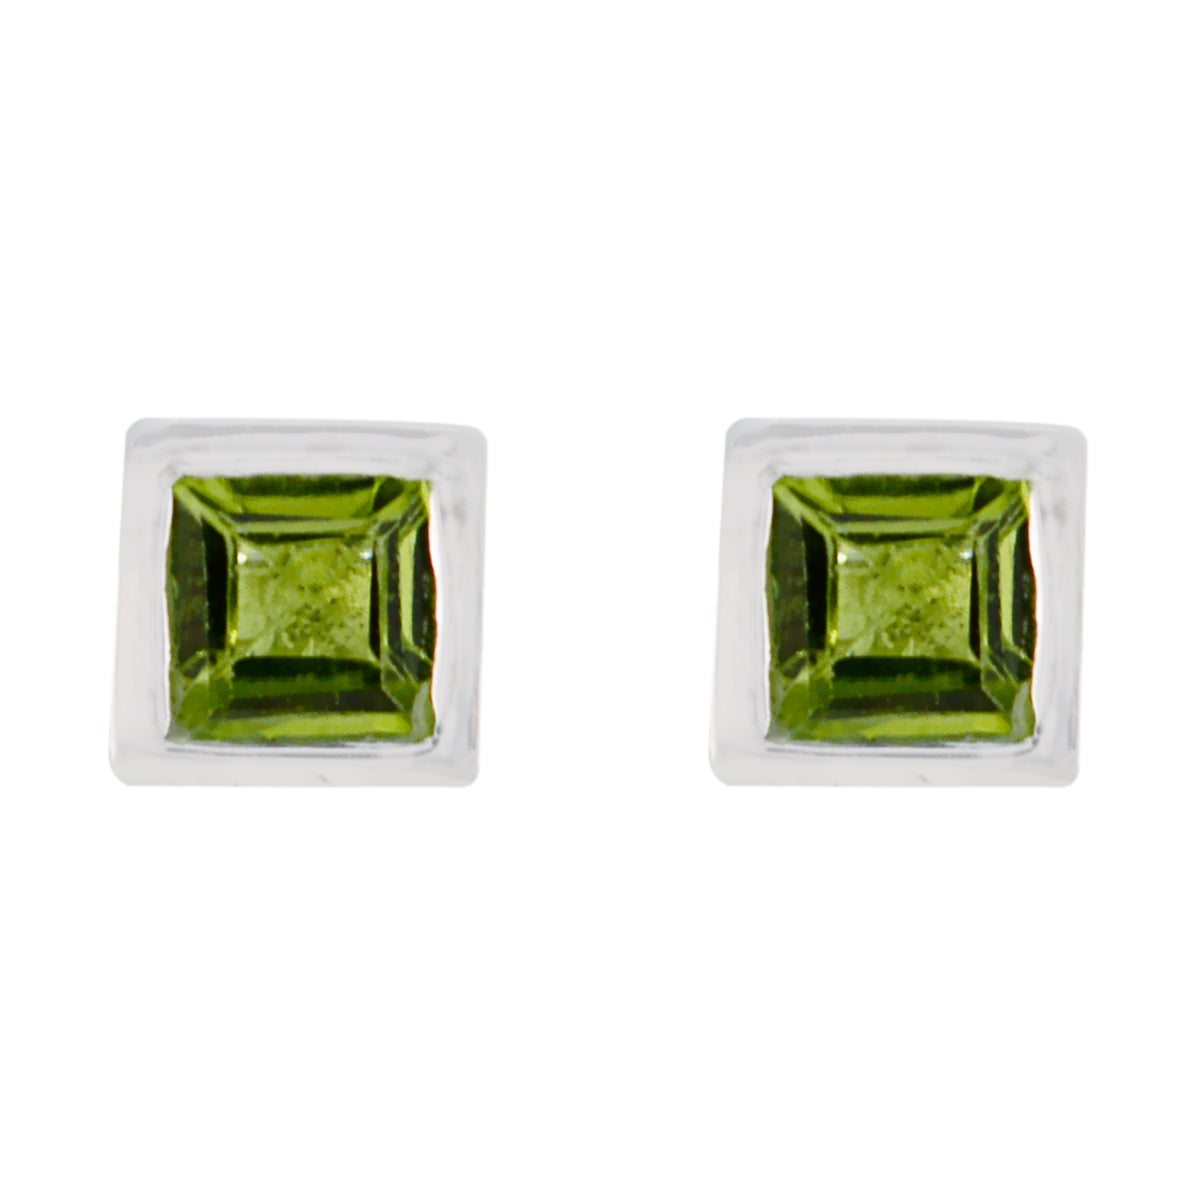 Riyo Good Gemstones square Faceted Green Peridot Silver Earring gift for mother's day